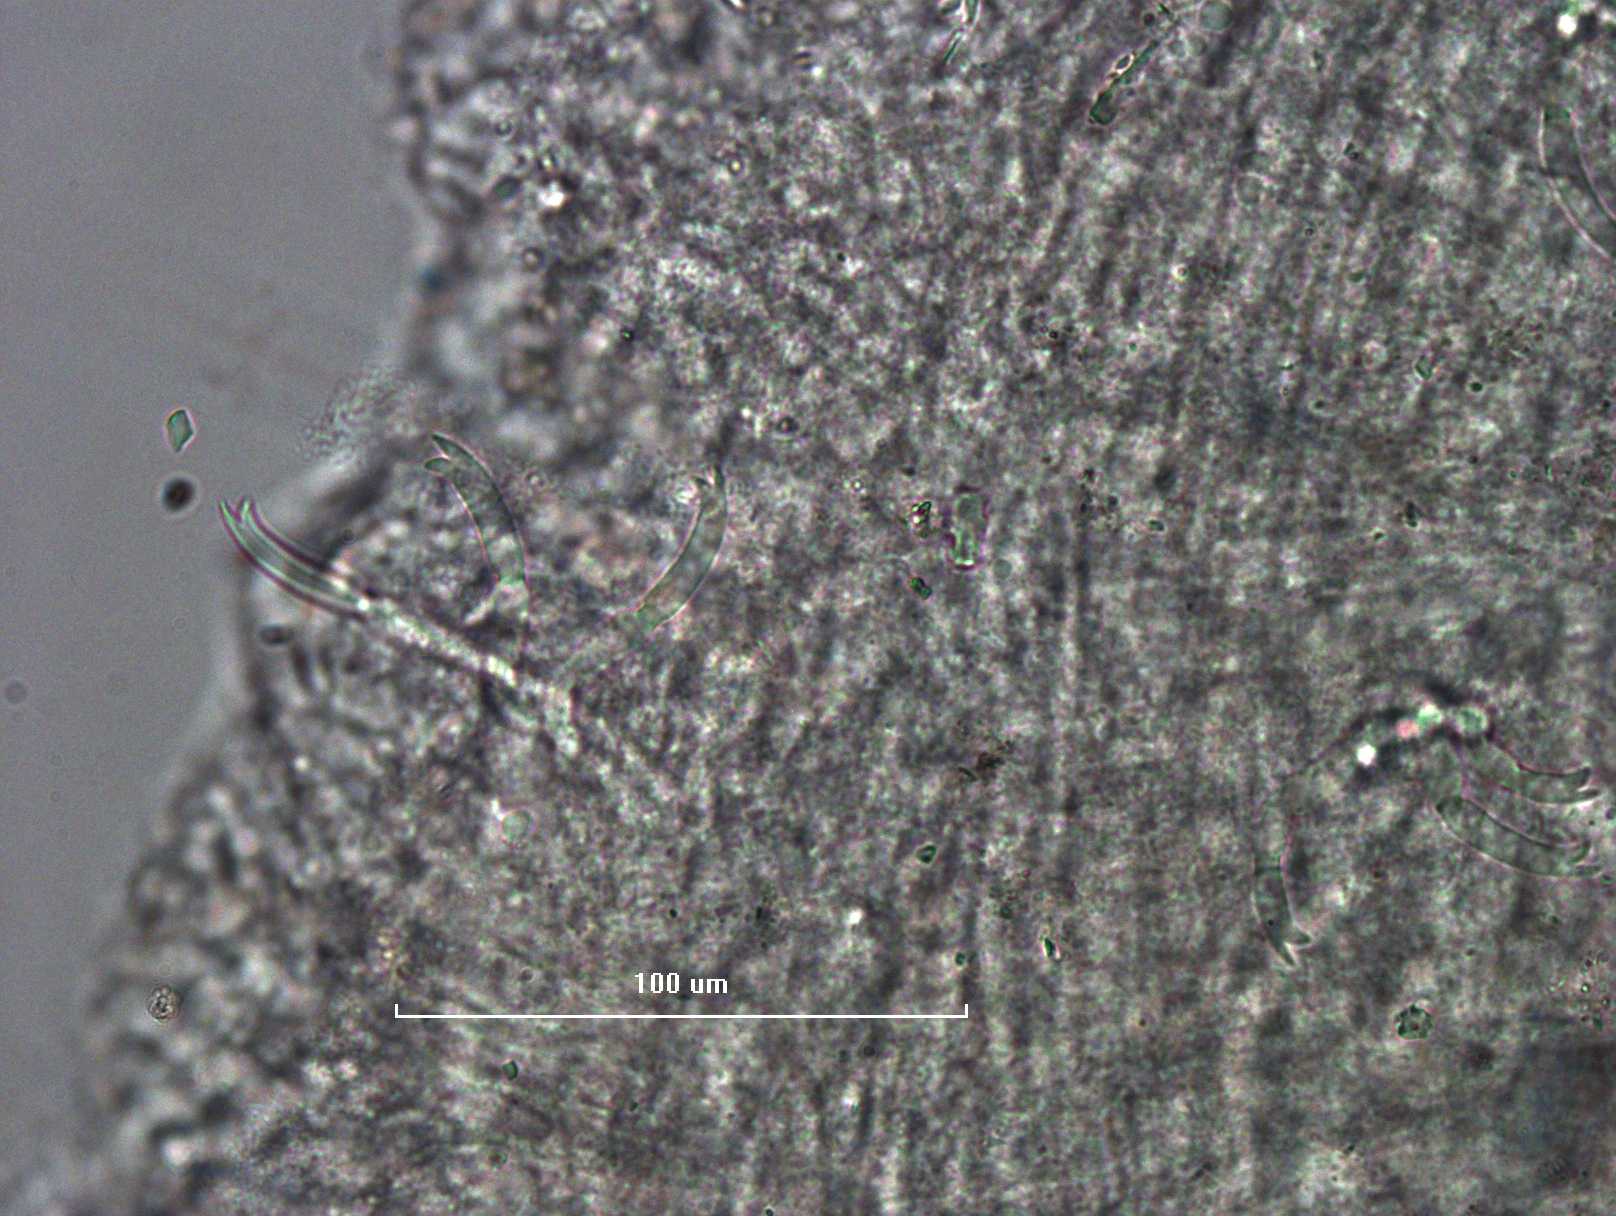 Photomicrograph of worm chaetae showing a set of chaetae with short, thick bifid teeth of equal length.